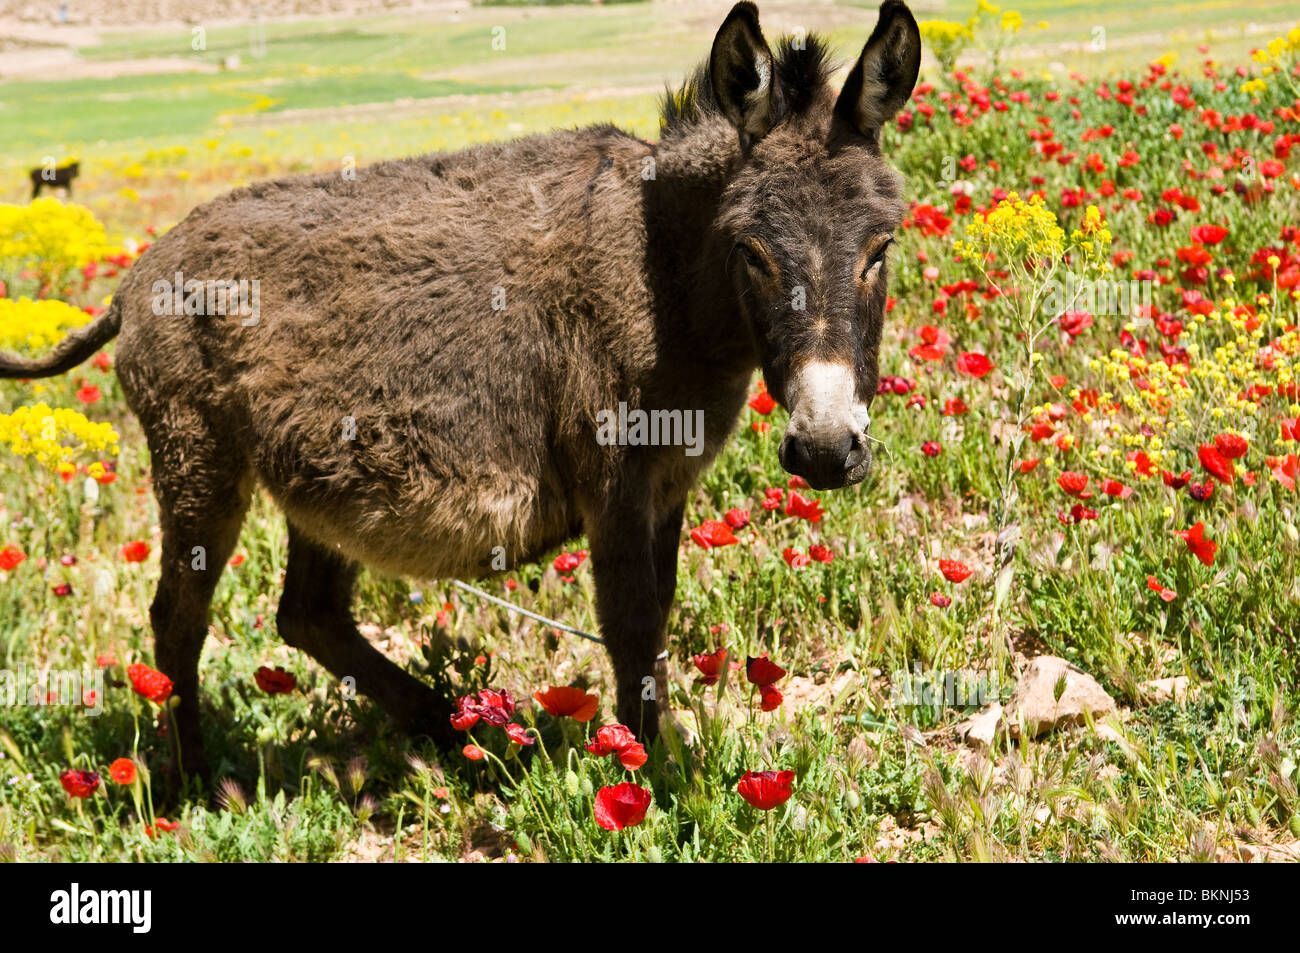 A donkey grazing in a field full of colorful flowers. Stock Photo